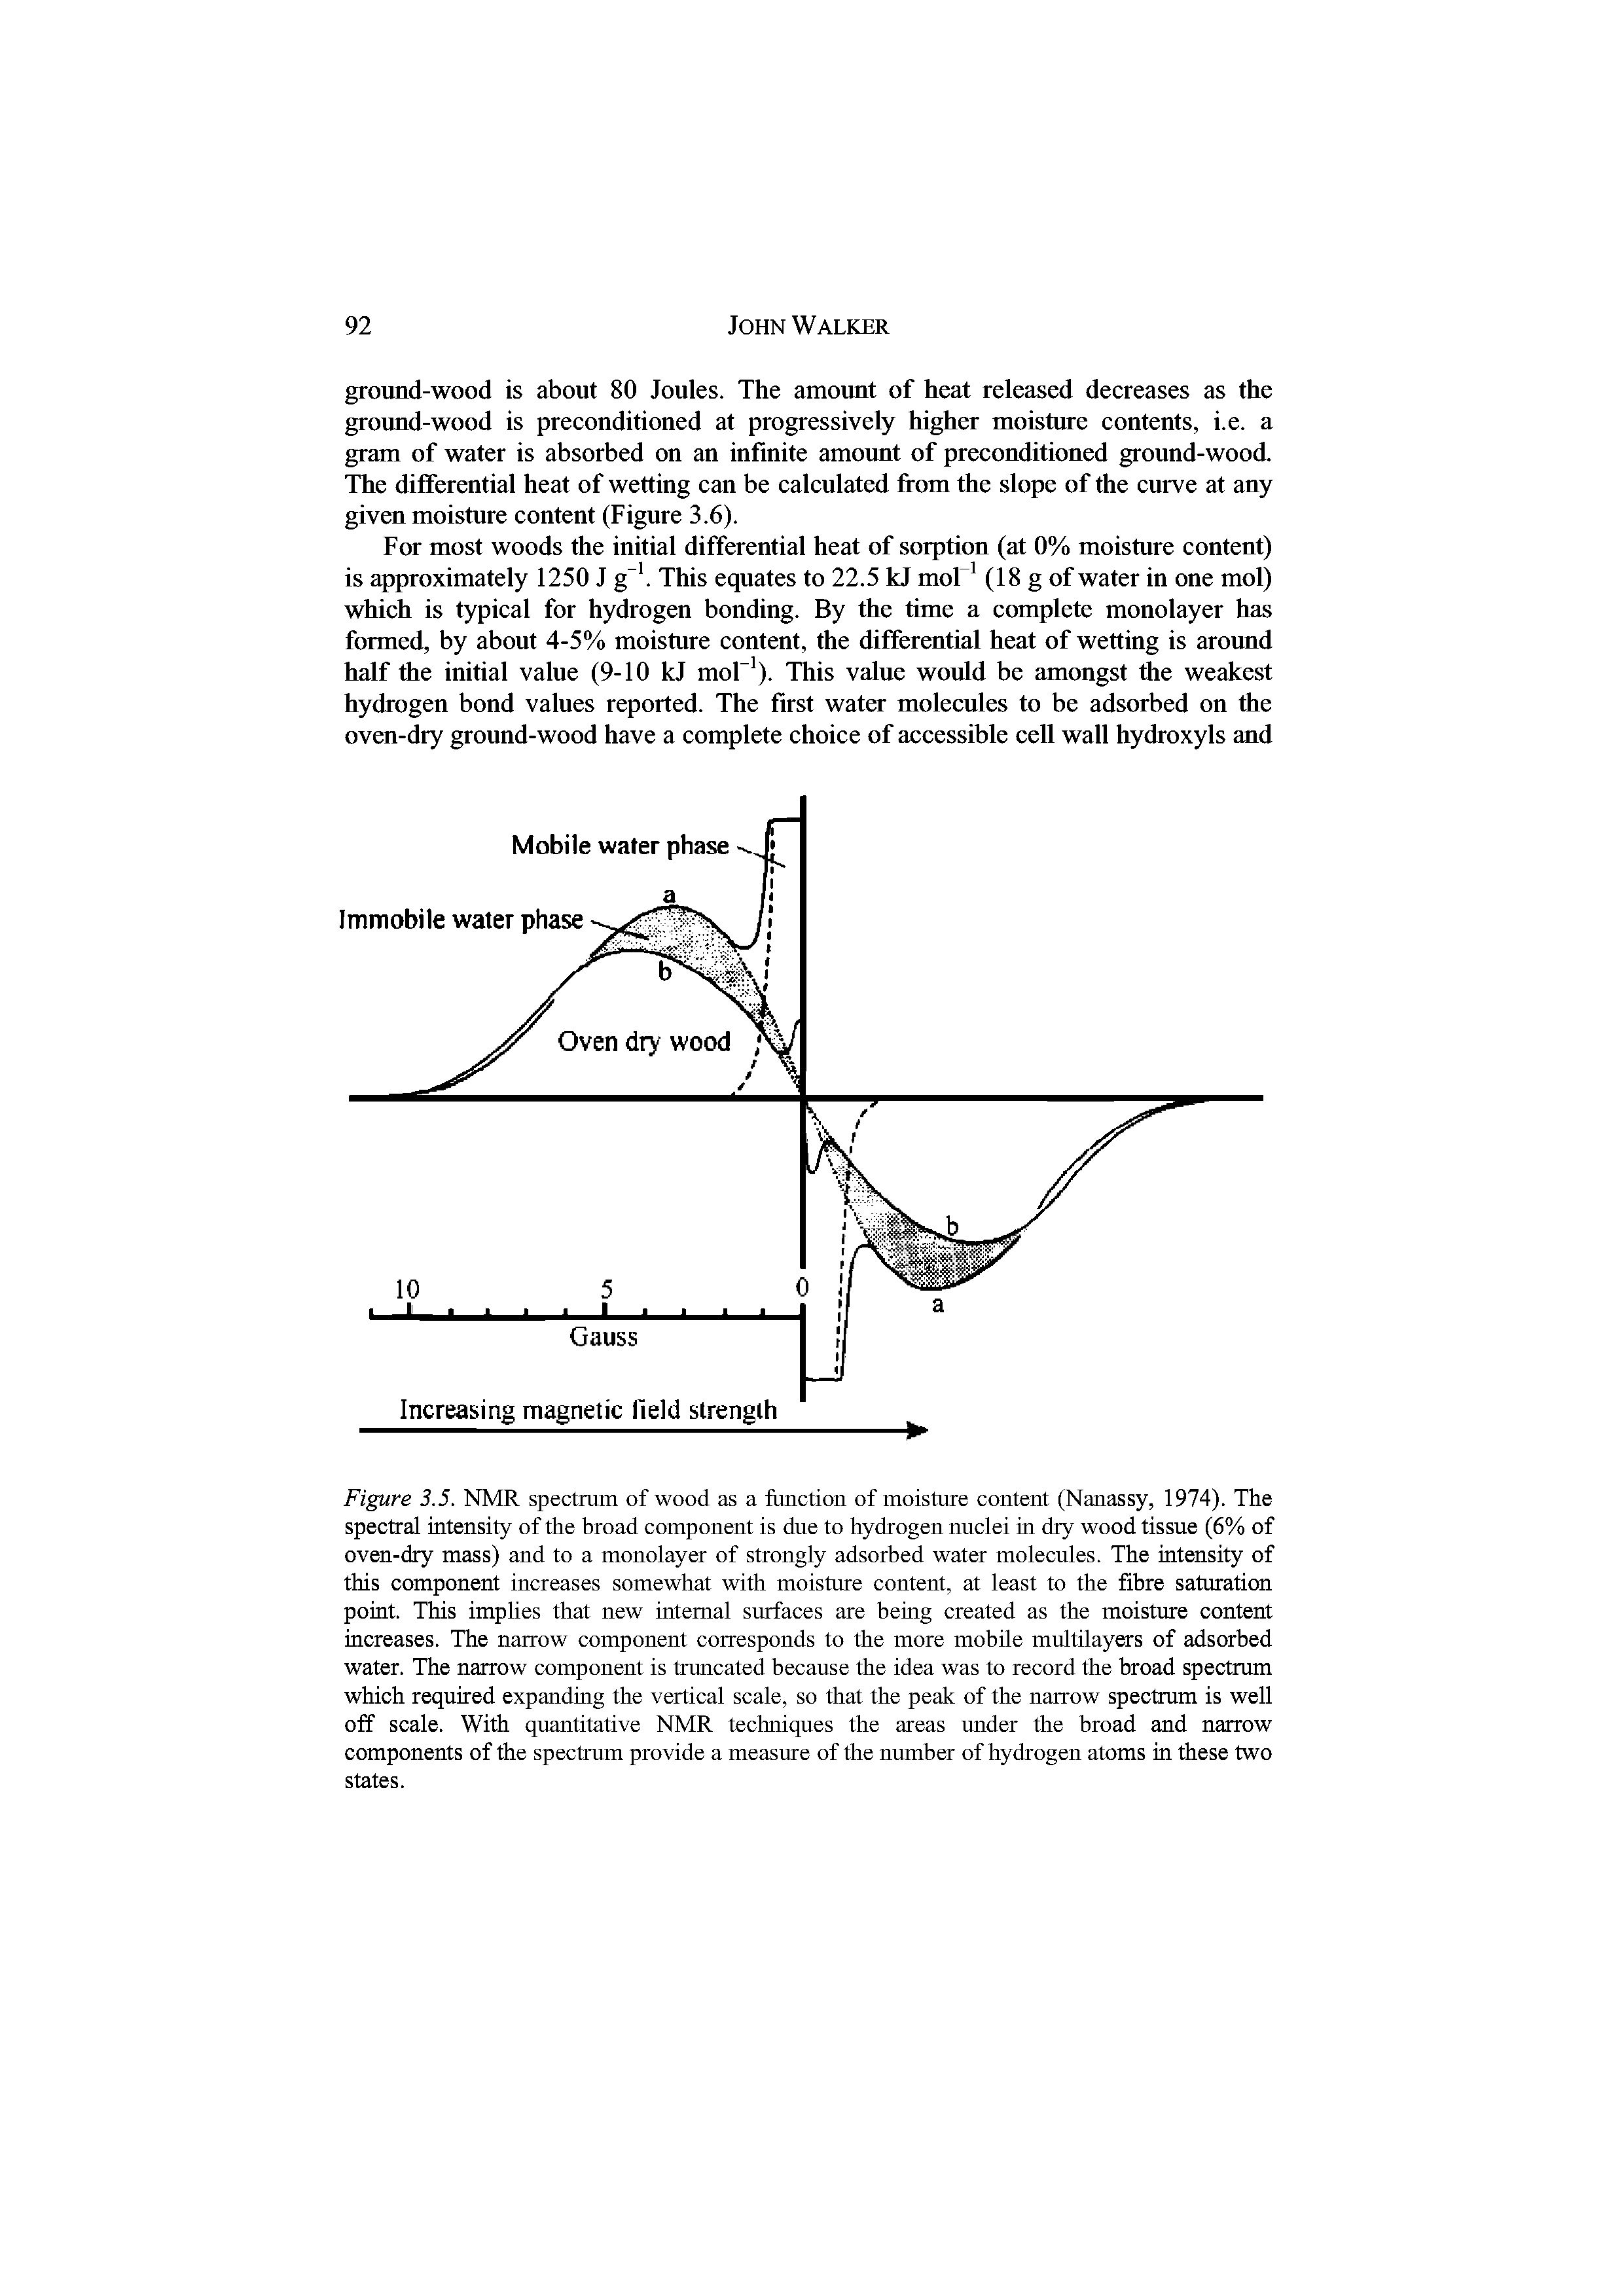 Figure 3.5. NMR spectrum of wood as a function of moisture content (Nanassy, 1974). The spectral intensity of the broad component is due to hydrogen nuclei in dry wood tissue (6% of oven-dry mass) and to a monolayer of strongly adsorbed water molecules. The intensity of this component increases somewhat with moisture content, at least to the fibre saturation point. This implies that new internal surfaces are being created as the moisture content increases. The narrow component corresponds to the more mobile multilayers of adsorbed water. The narrow component is truncated because the idea was to record the broad spectmm which required expanding the vertical scale, so that the peak of the narrow spectmm is well off scale. With quantitative NMR techniques the areas under the broad and narrow components of the spectmm provide a measure of the number of hydrogen atoms in these two states.